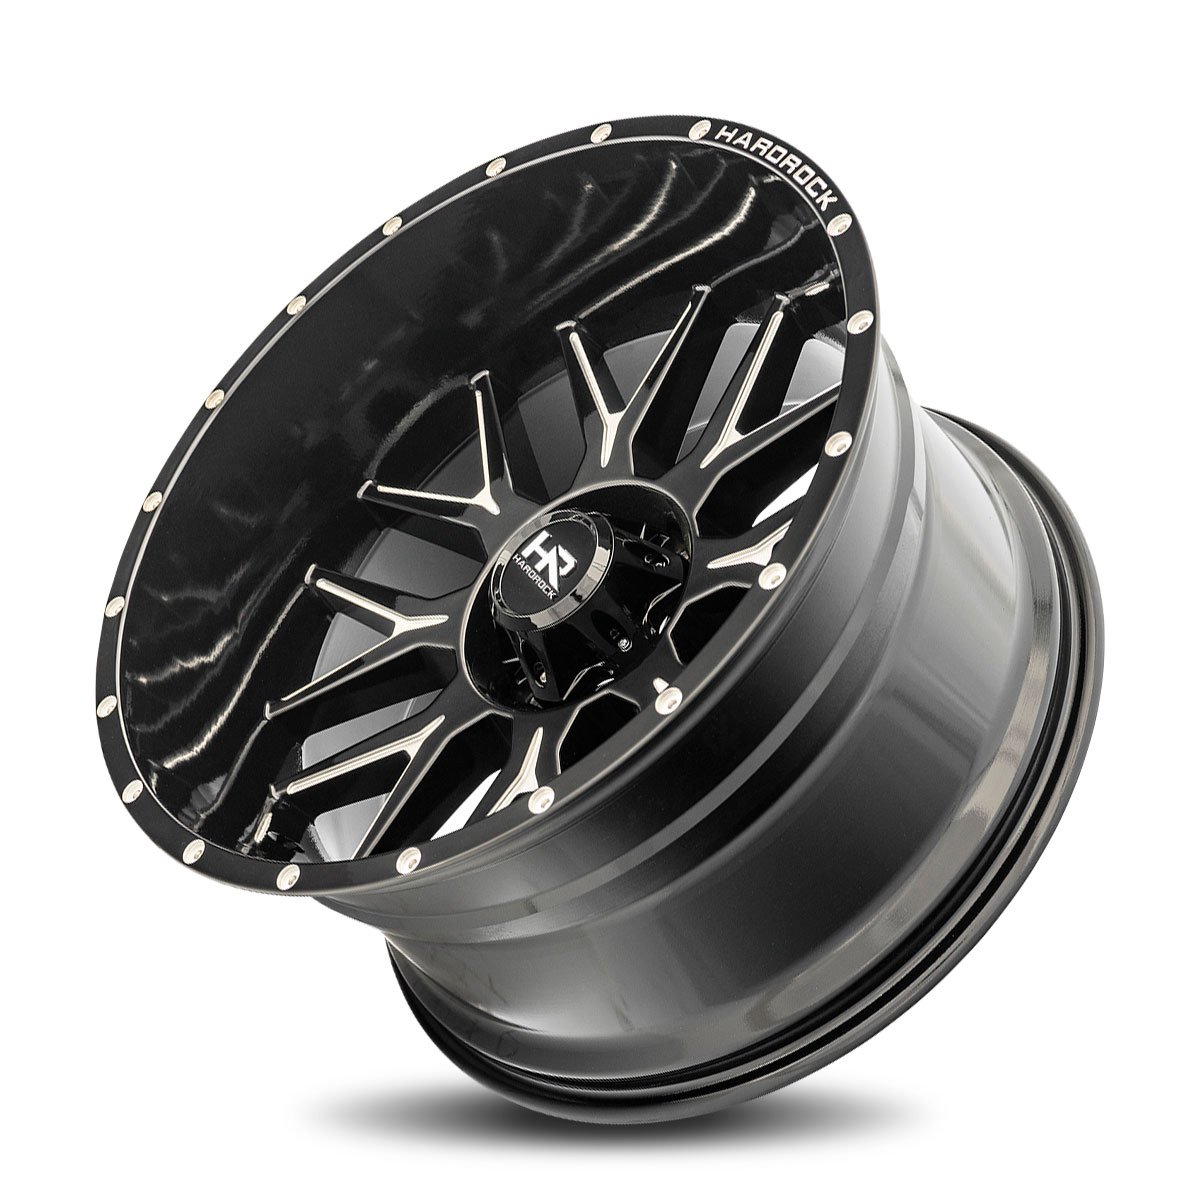 hardrock offroad wheels h500 affliction xposed gloss black milled